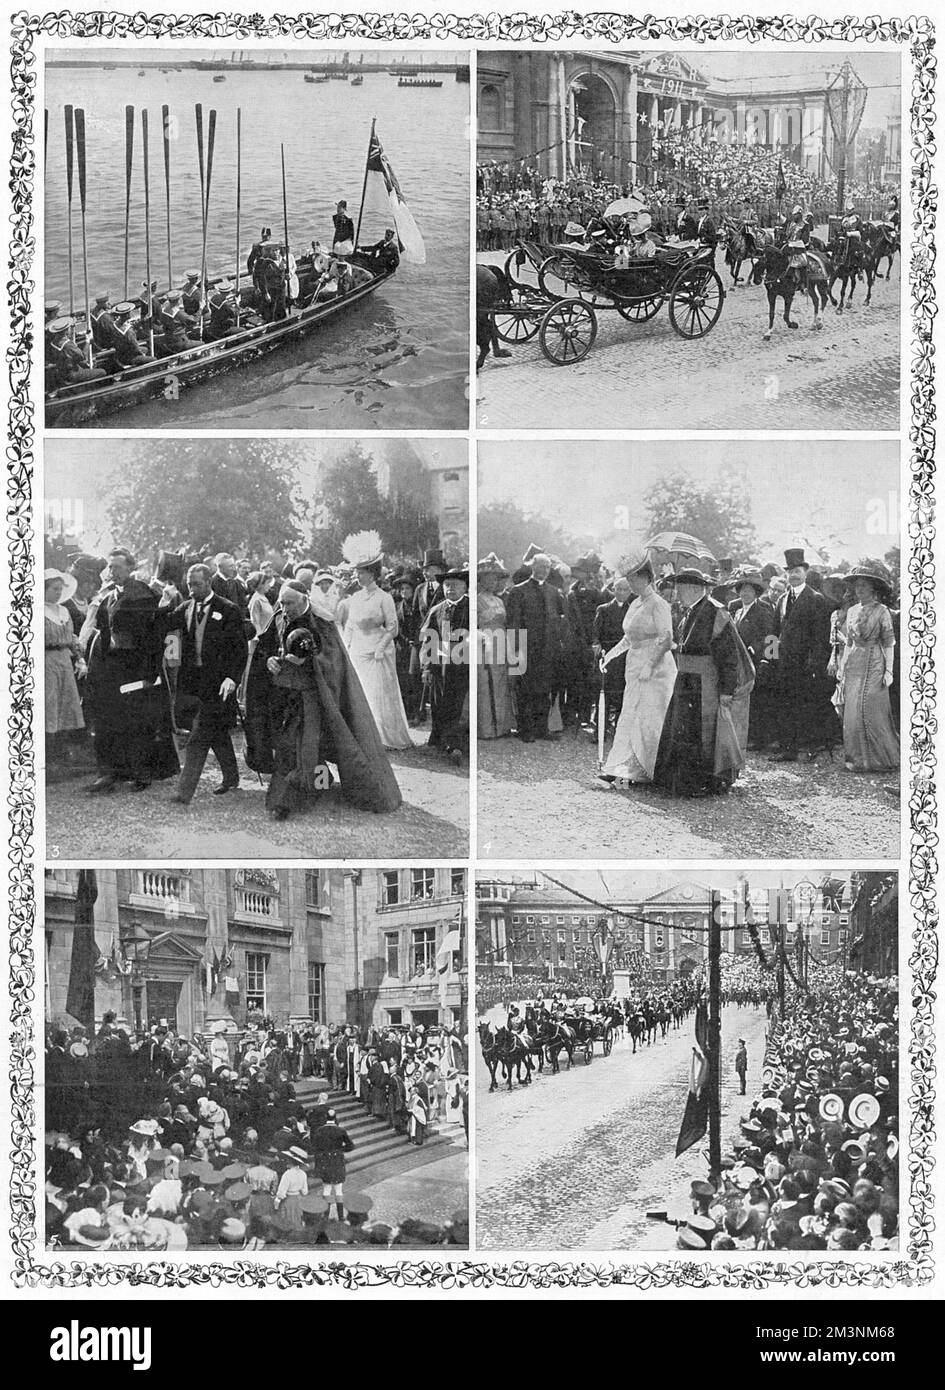 Page from the Illustrated London News 15th July 1911 about King George V's visit to Ireland - 'a repetition of &quot;unmixed pleasure&quot;'. From top left: the royal party land at Kingstown; the King driving past the Bank of Ireland, formerly the Irish House of Parliament; at Maynooth; the Queen at Maynooth in the grounds; receiving an address at Trinity College, Dublin; the crowd in College Green, welcoming the king.  1911 Stock Photo